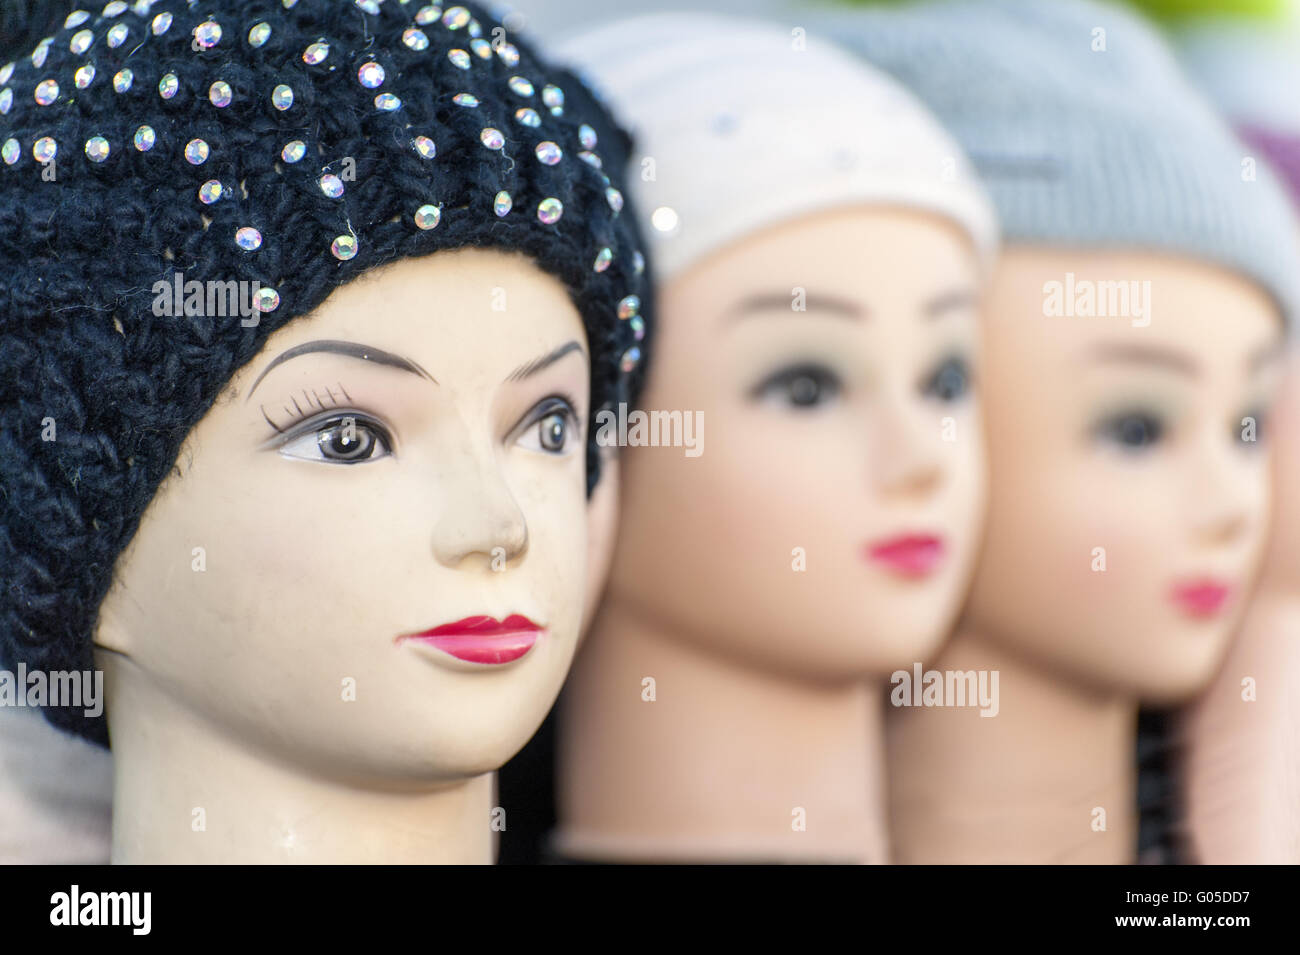 3 dolls heads side by side with knitted hats Stock Photo